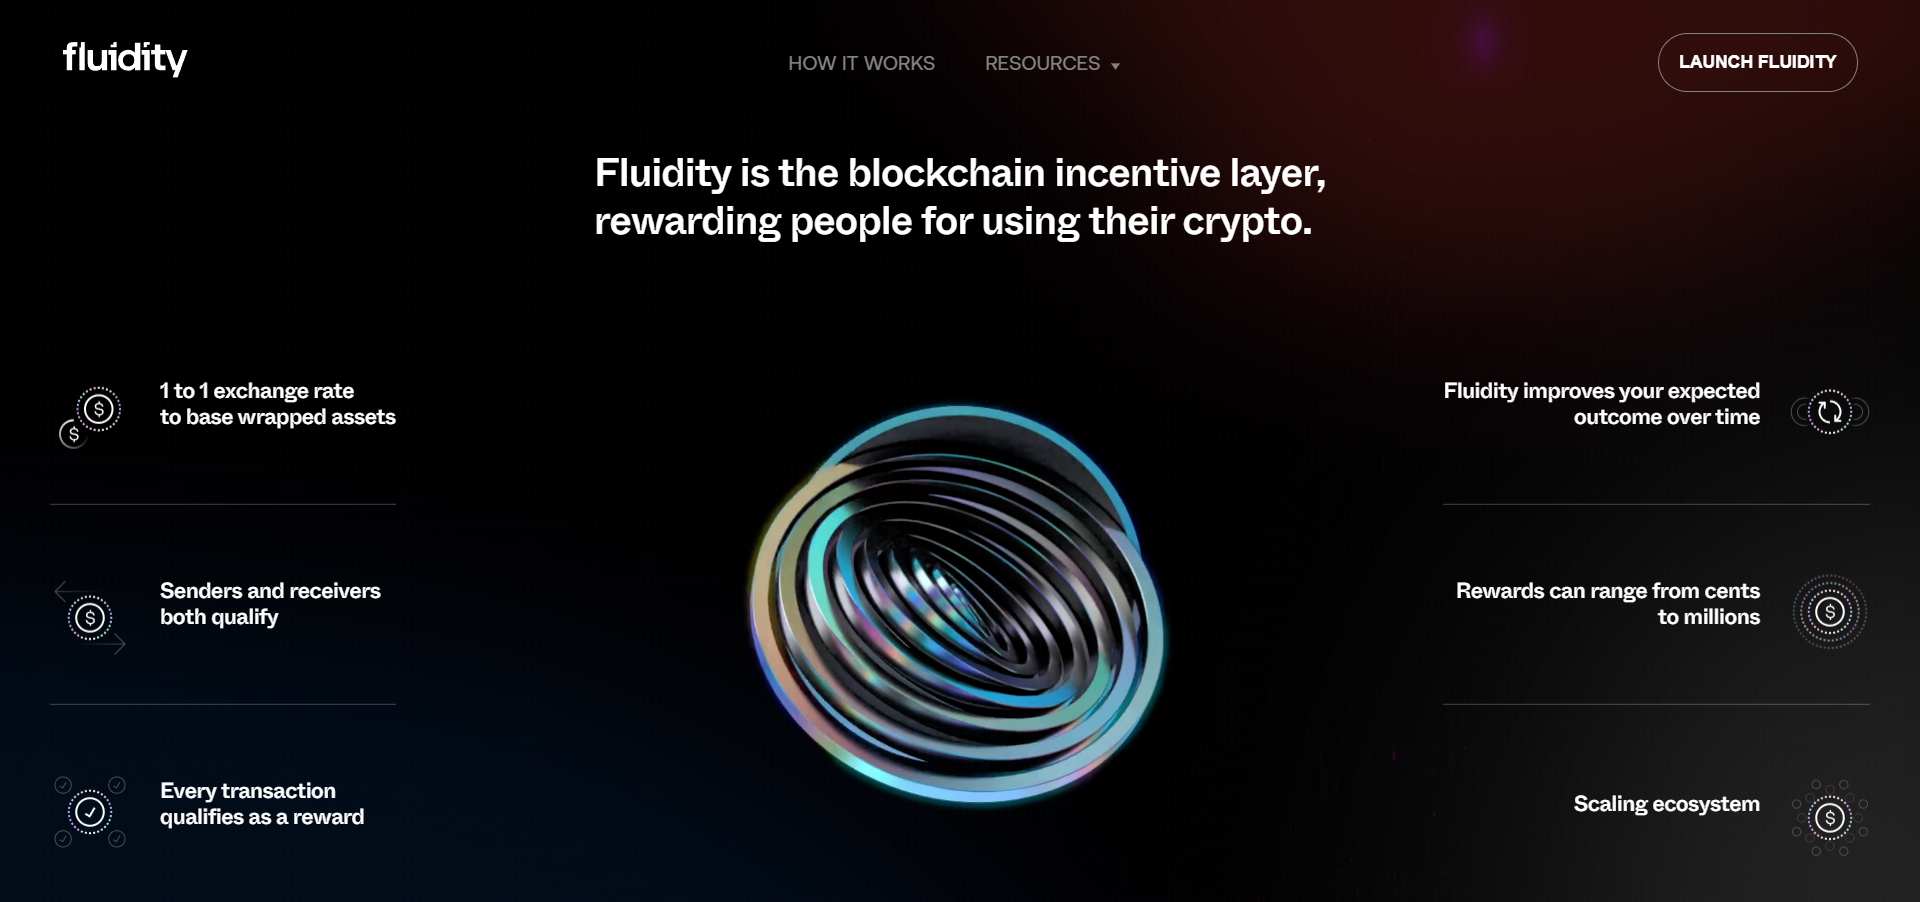 Fluidity launches on Ethereum (ETH) mainnet